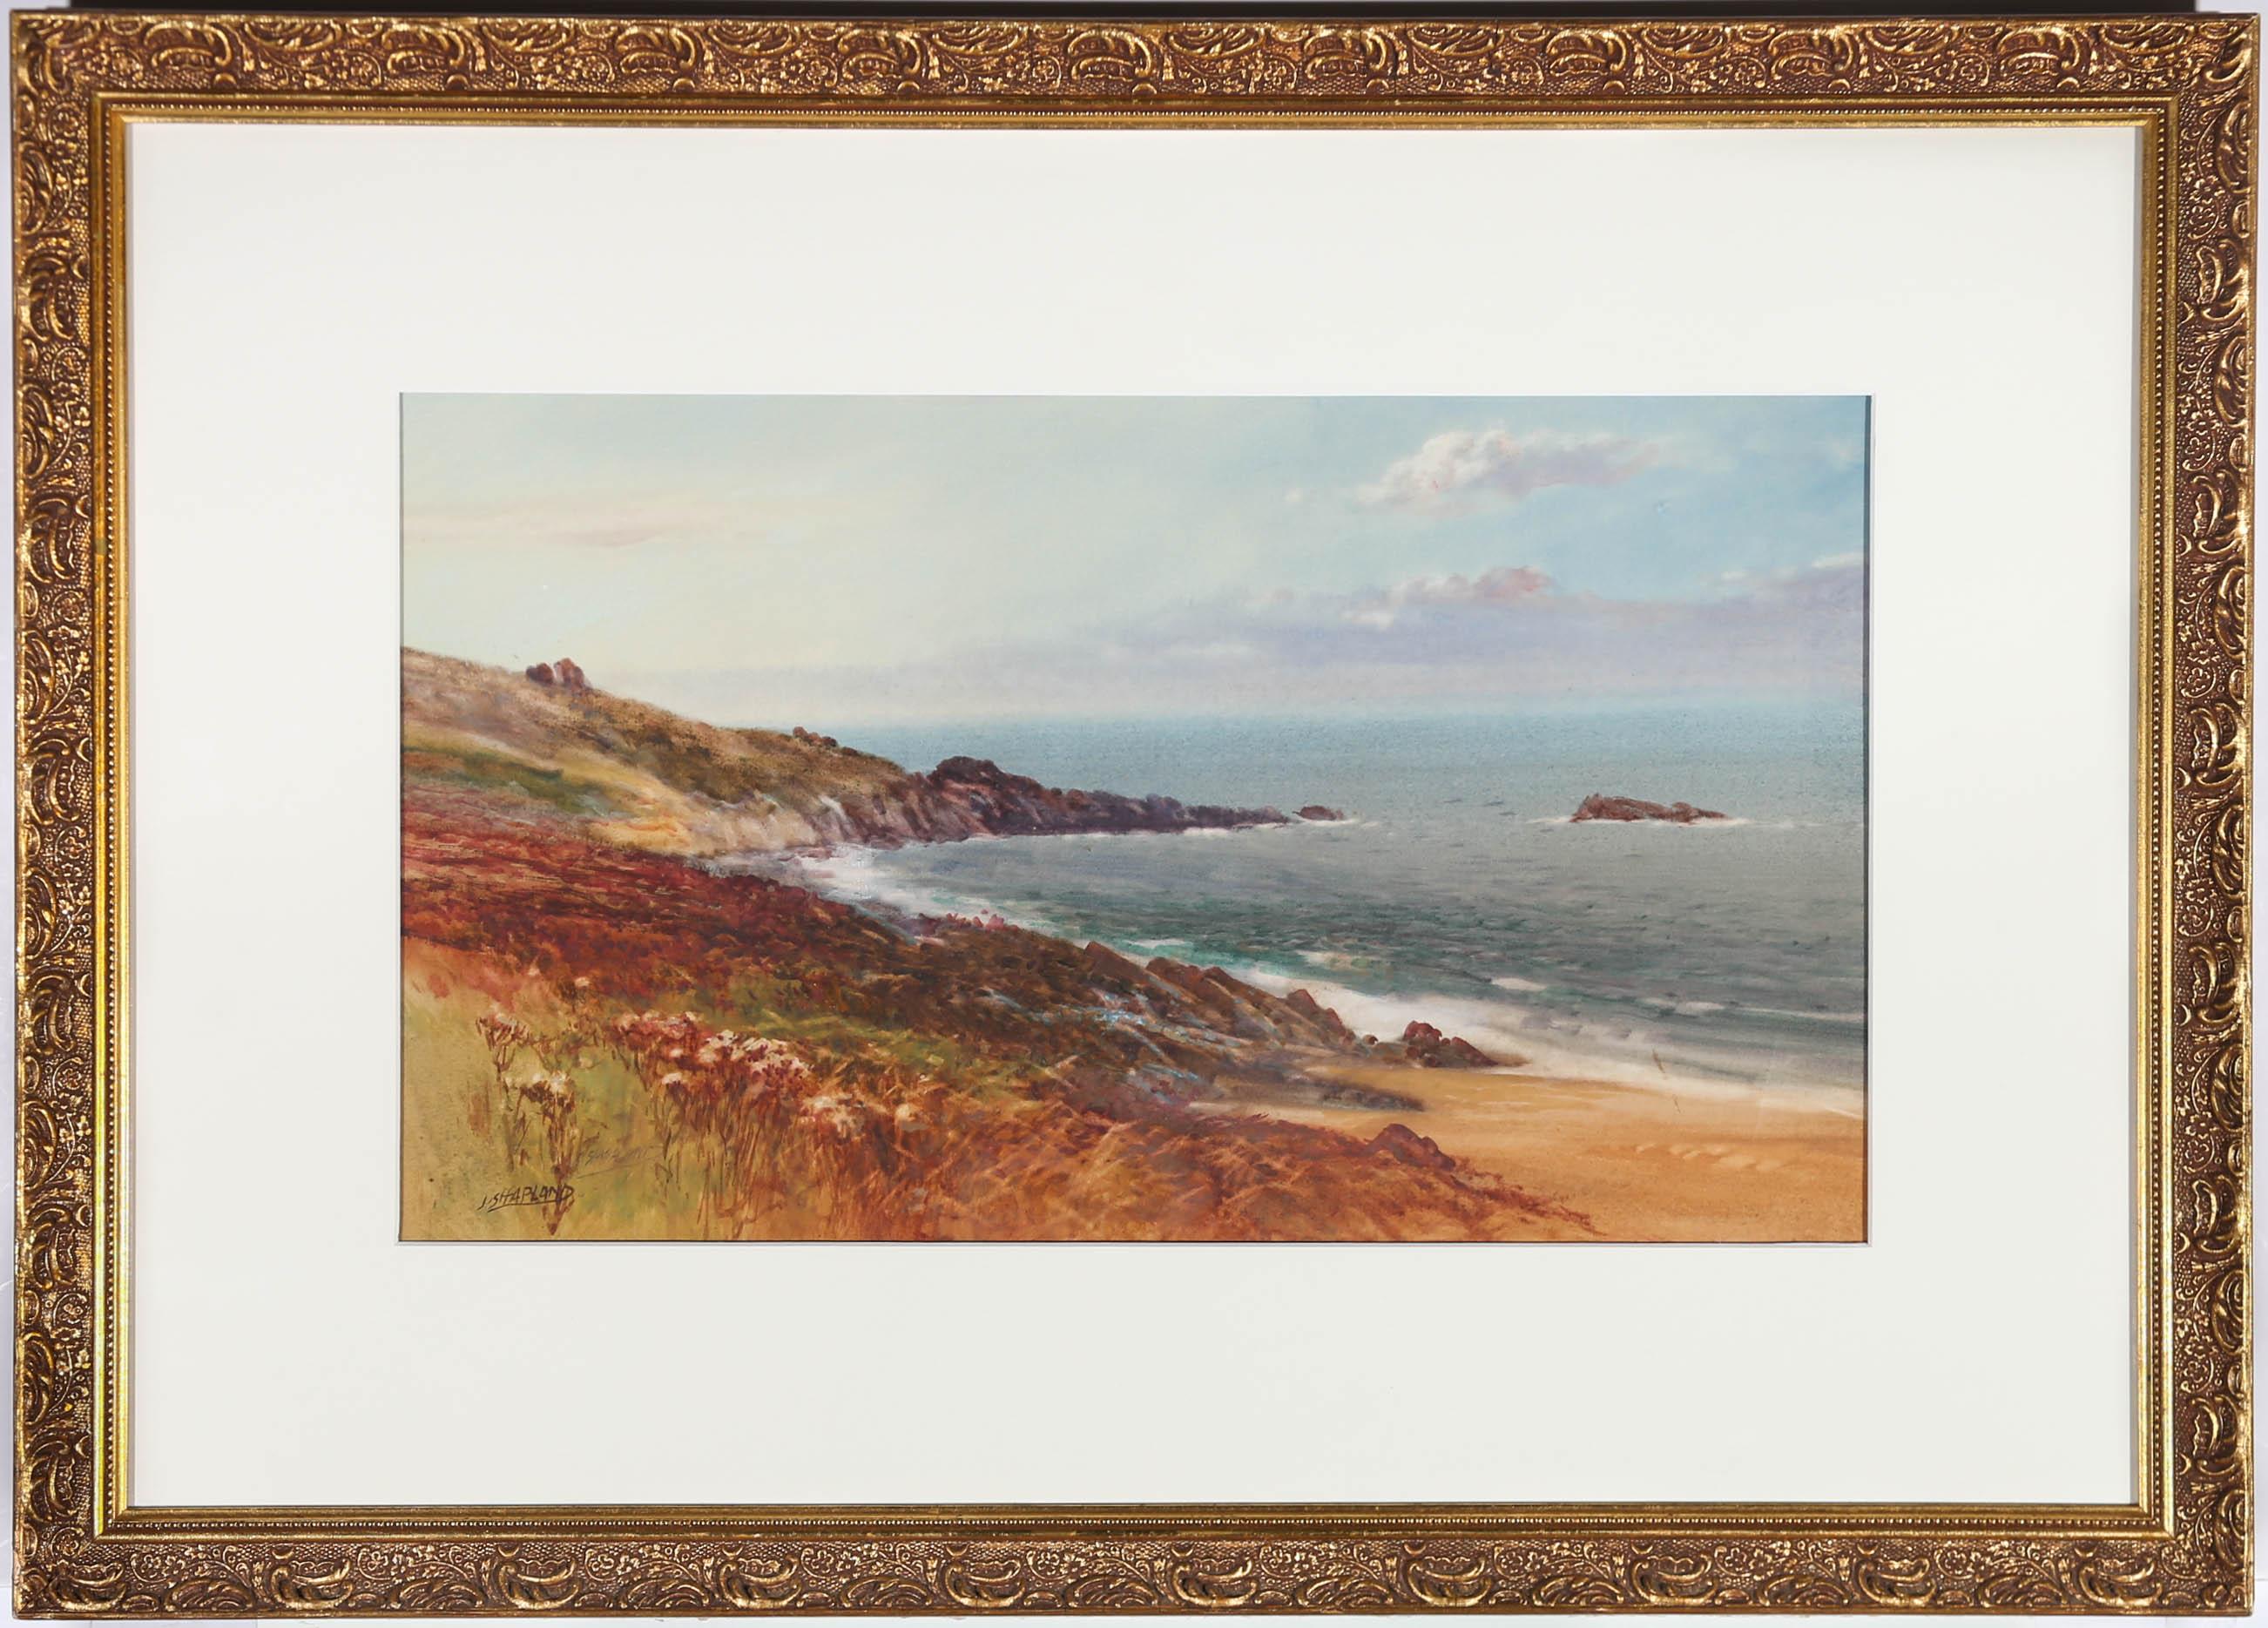 This delightful watercolour study depicting the sweeping Cornish coastline near St. Ives. The artist uses gouache to highlight textural elements in the scene such as the tips of waves and the tall grass in the foreground. Signed twice to the lower